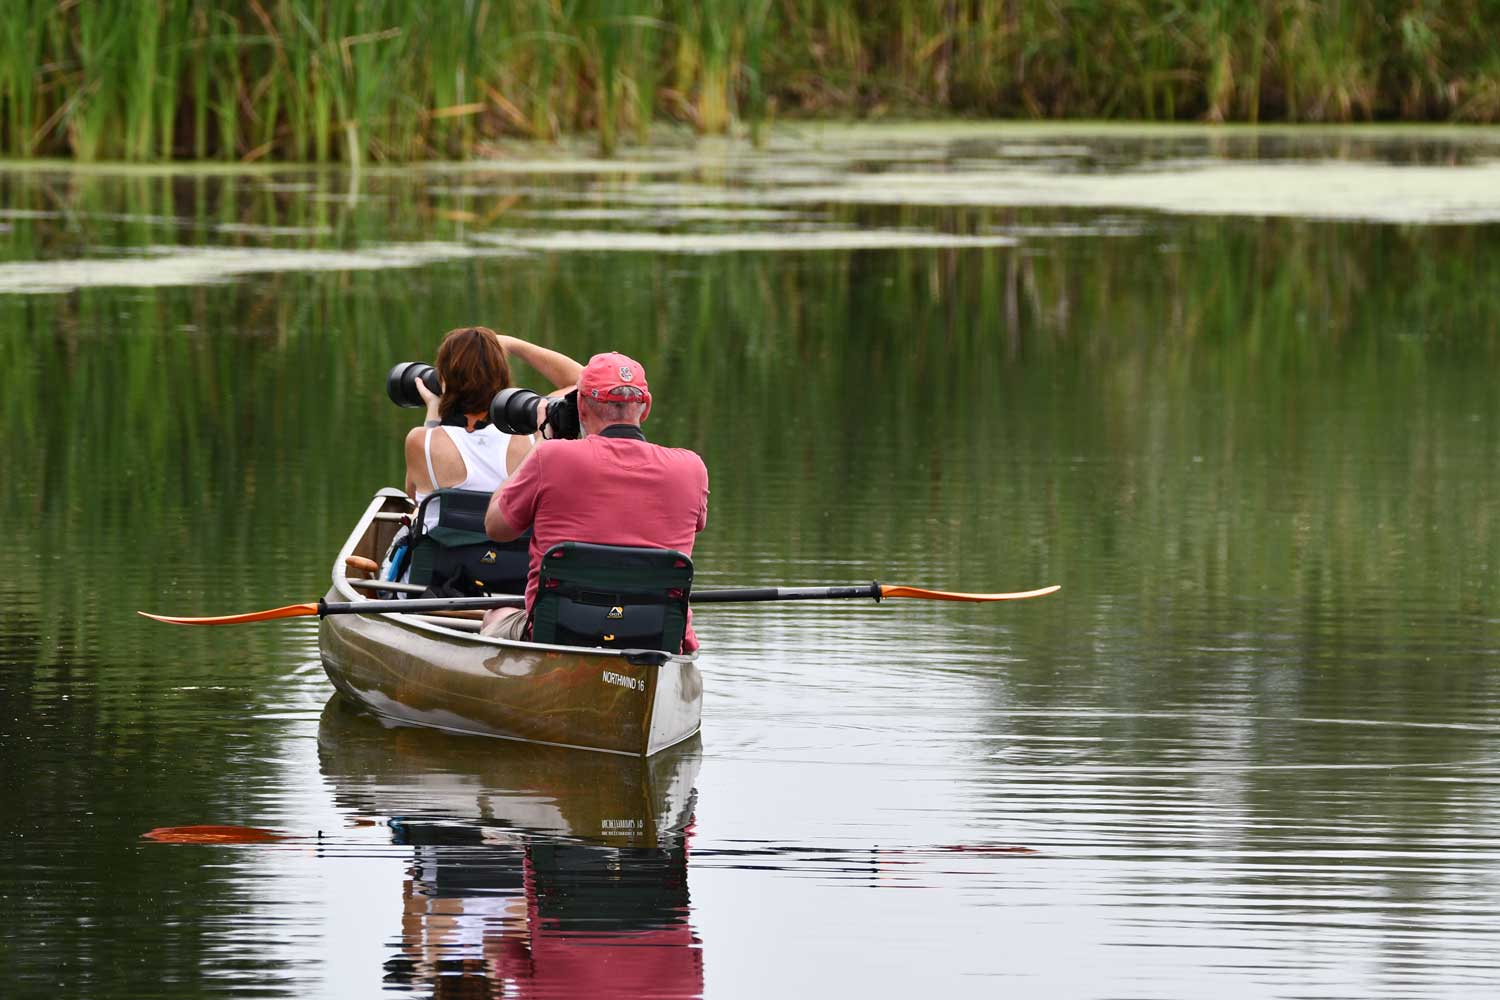 Two people taking photos with cameras while on a canoe on the water.